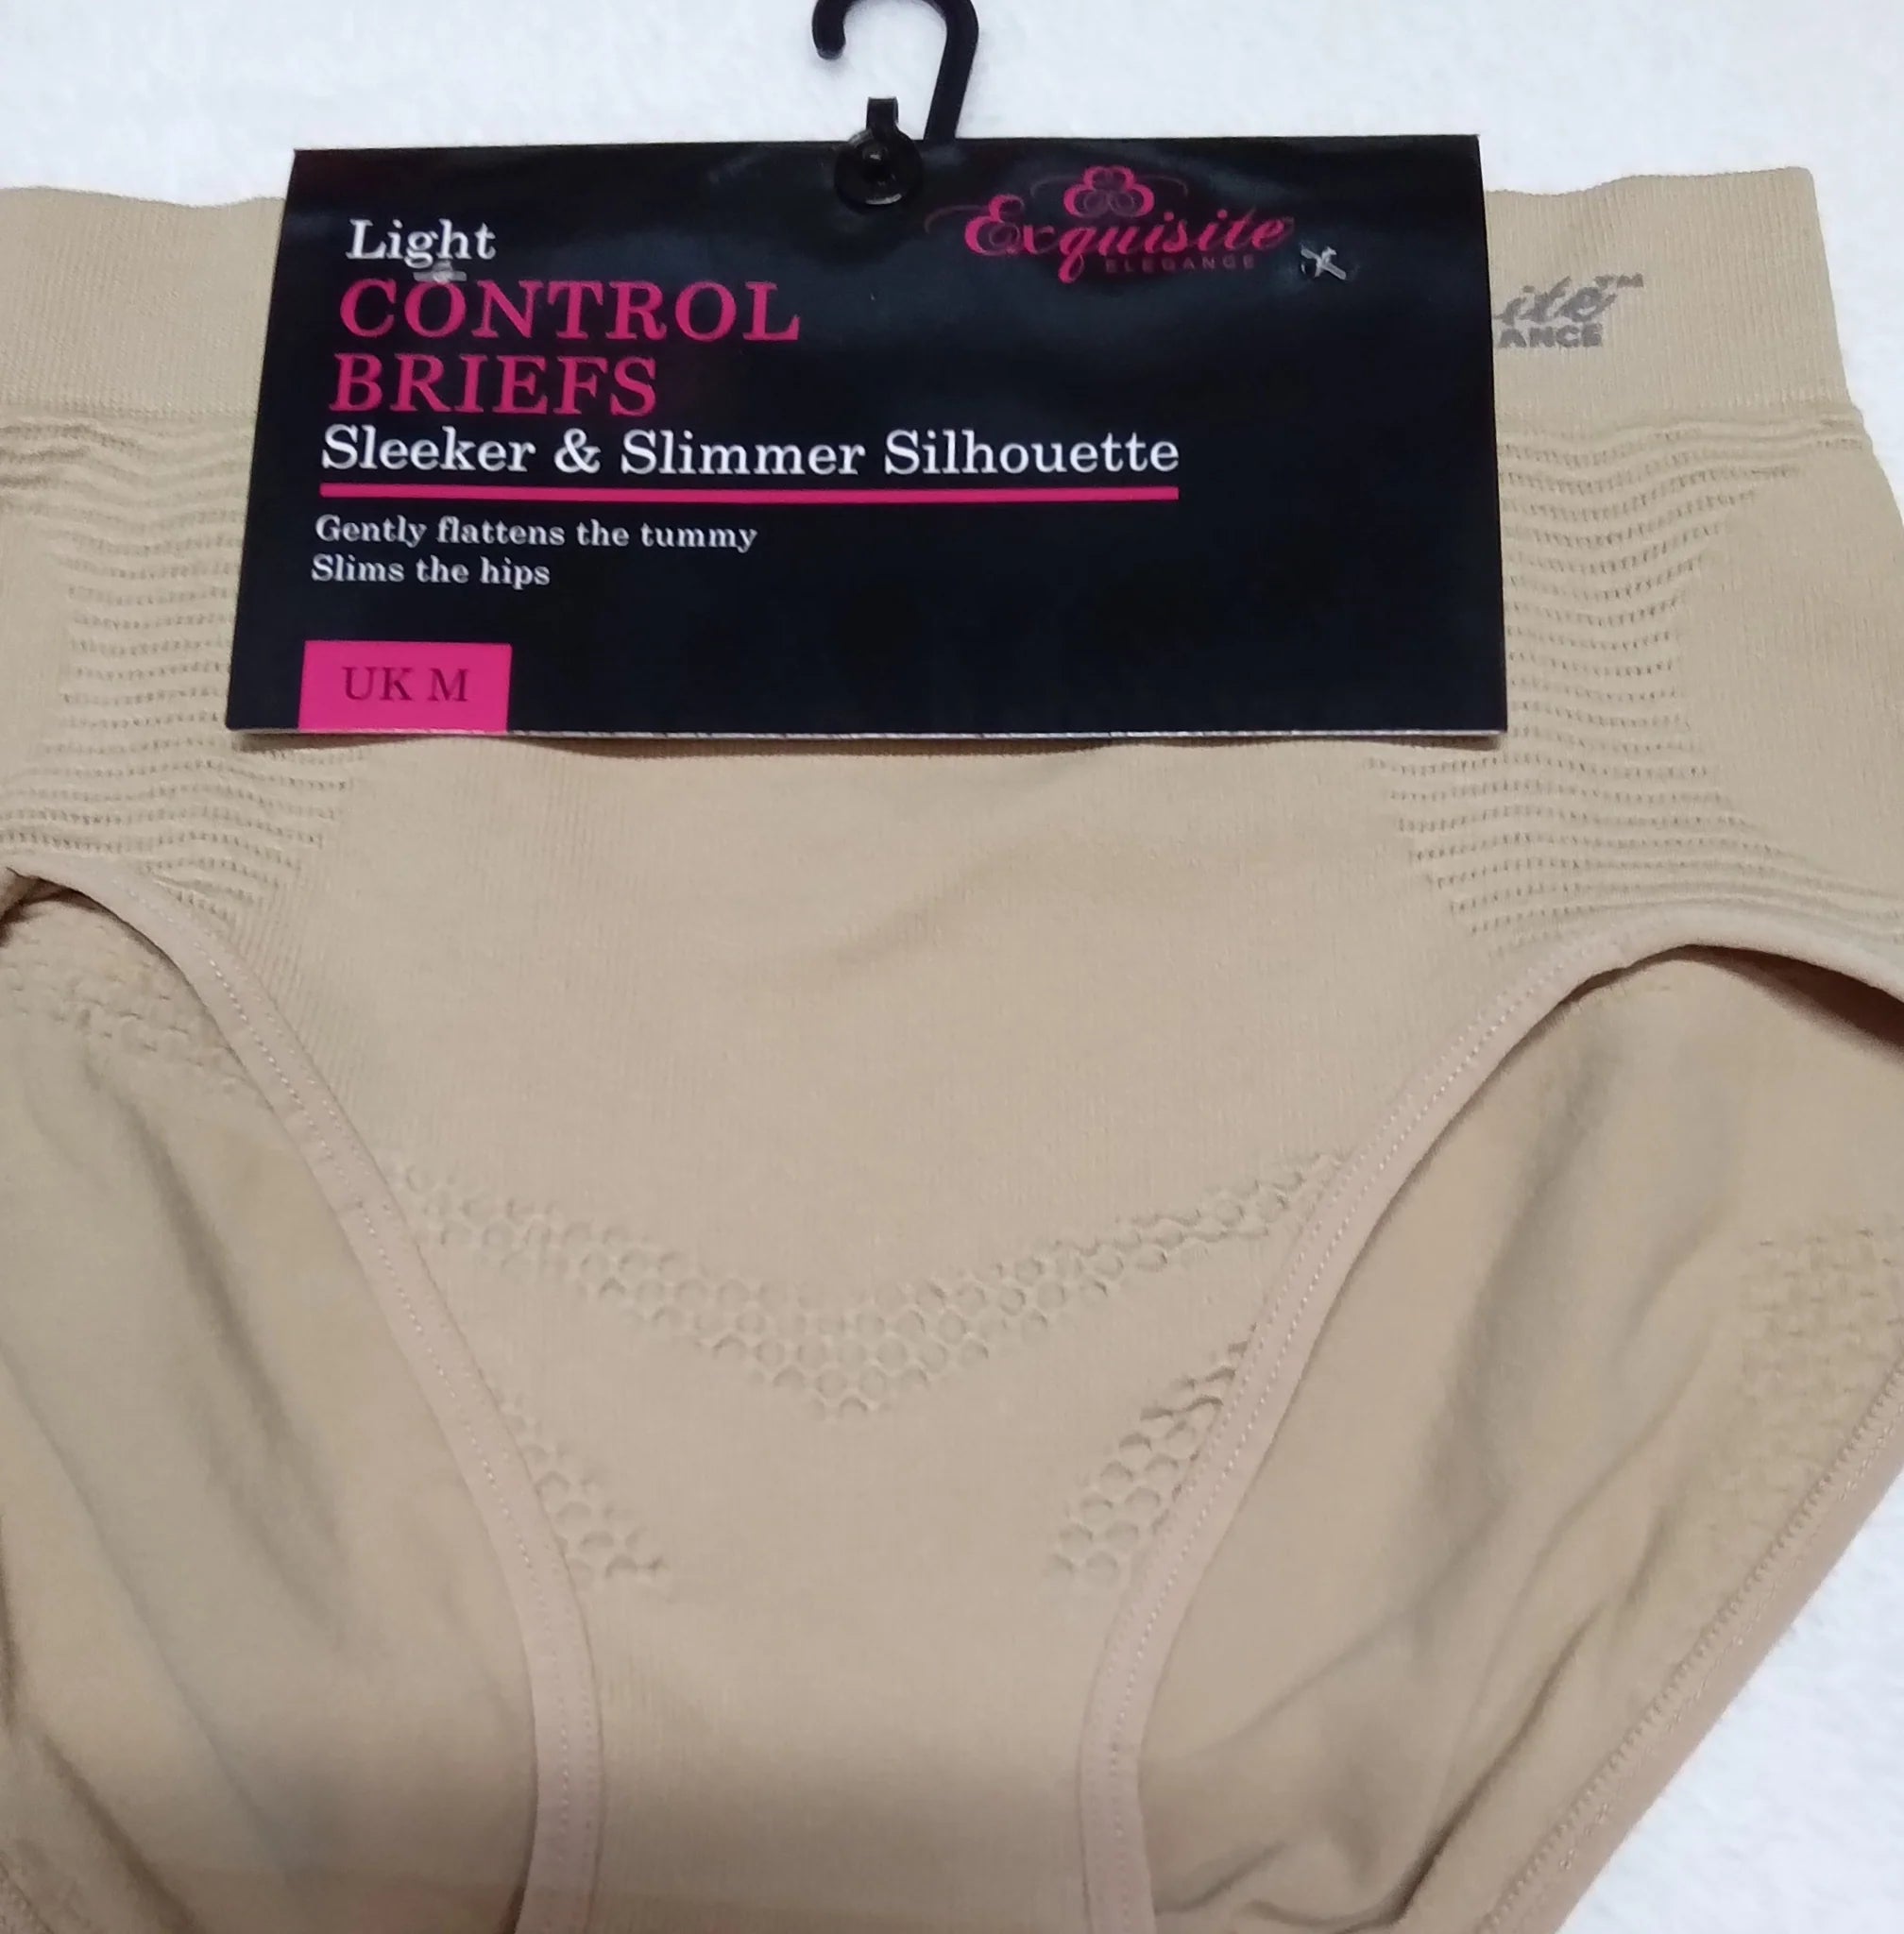 LADIES SEAMLESS CONTROL Brief Size 12-14 Valentina Brand New All Boxed  £2.75 - PicClick UK